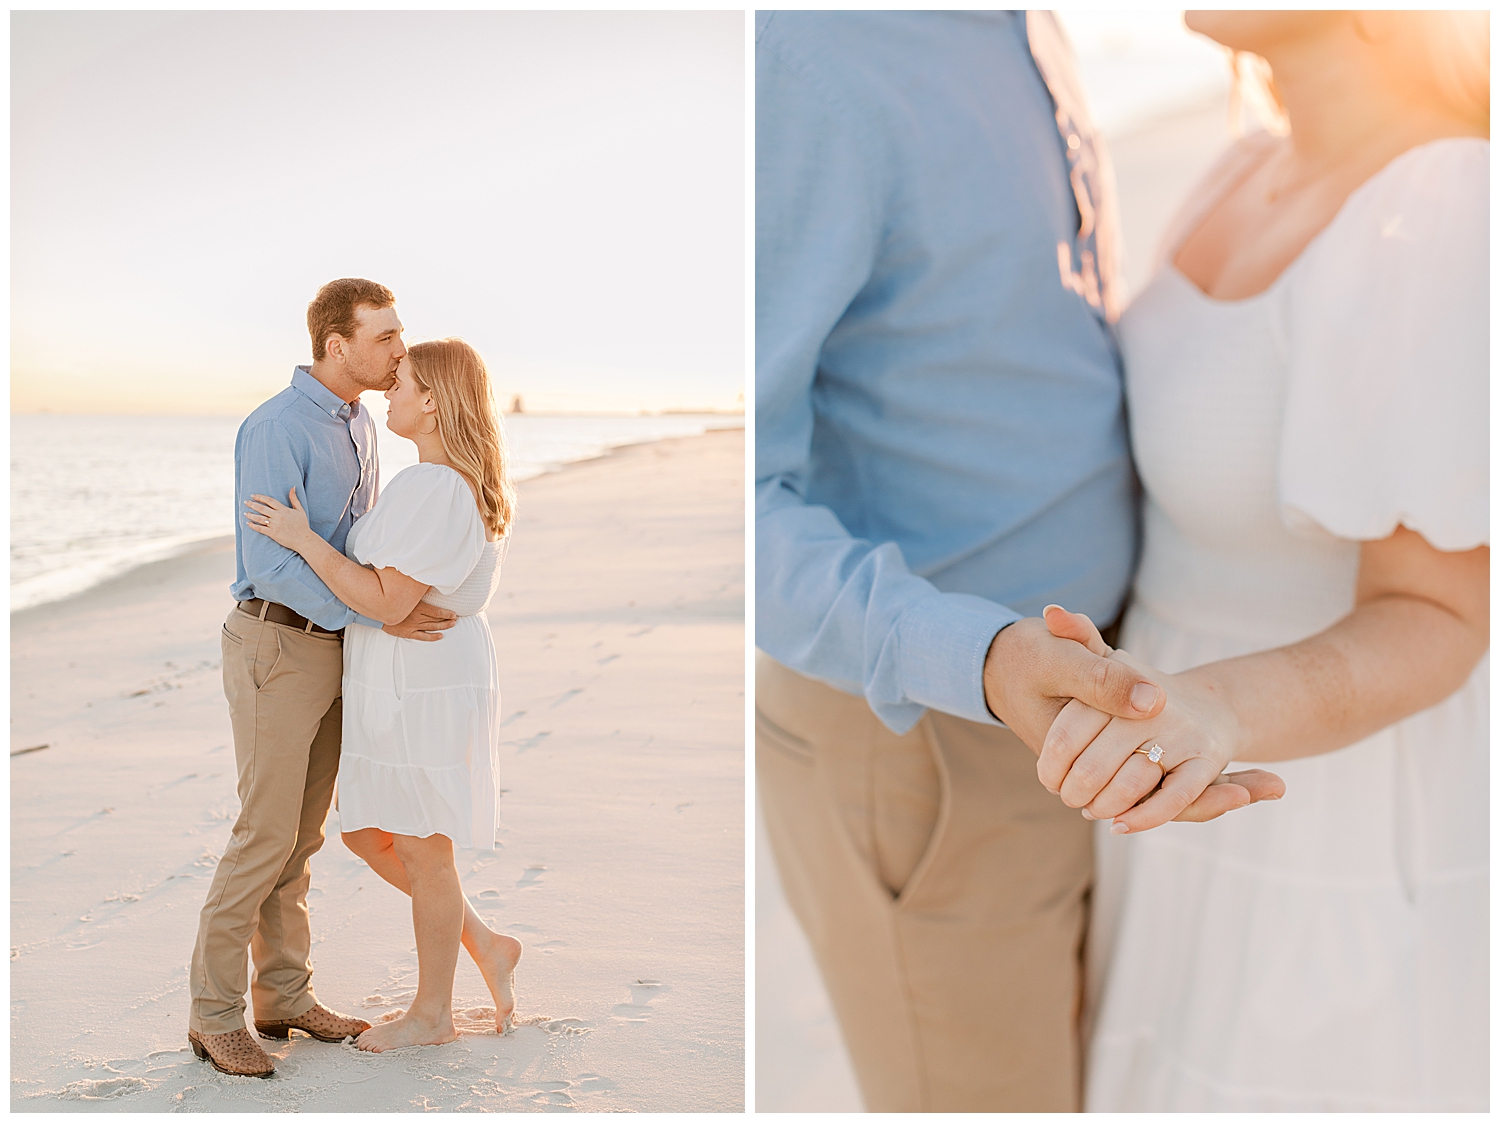 A couple takes engagement photos on the beach.